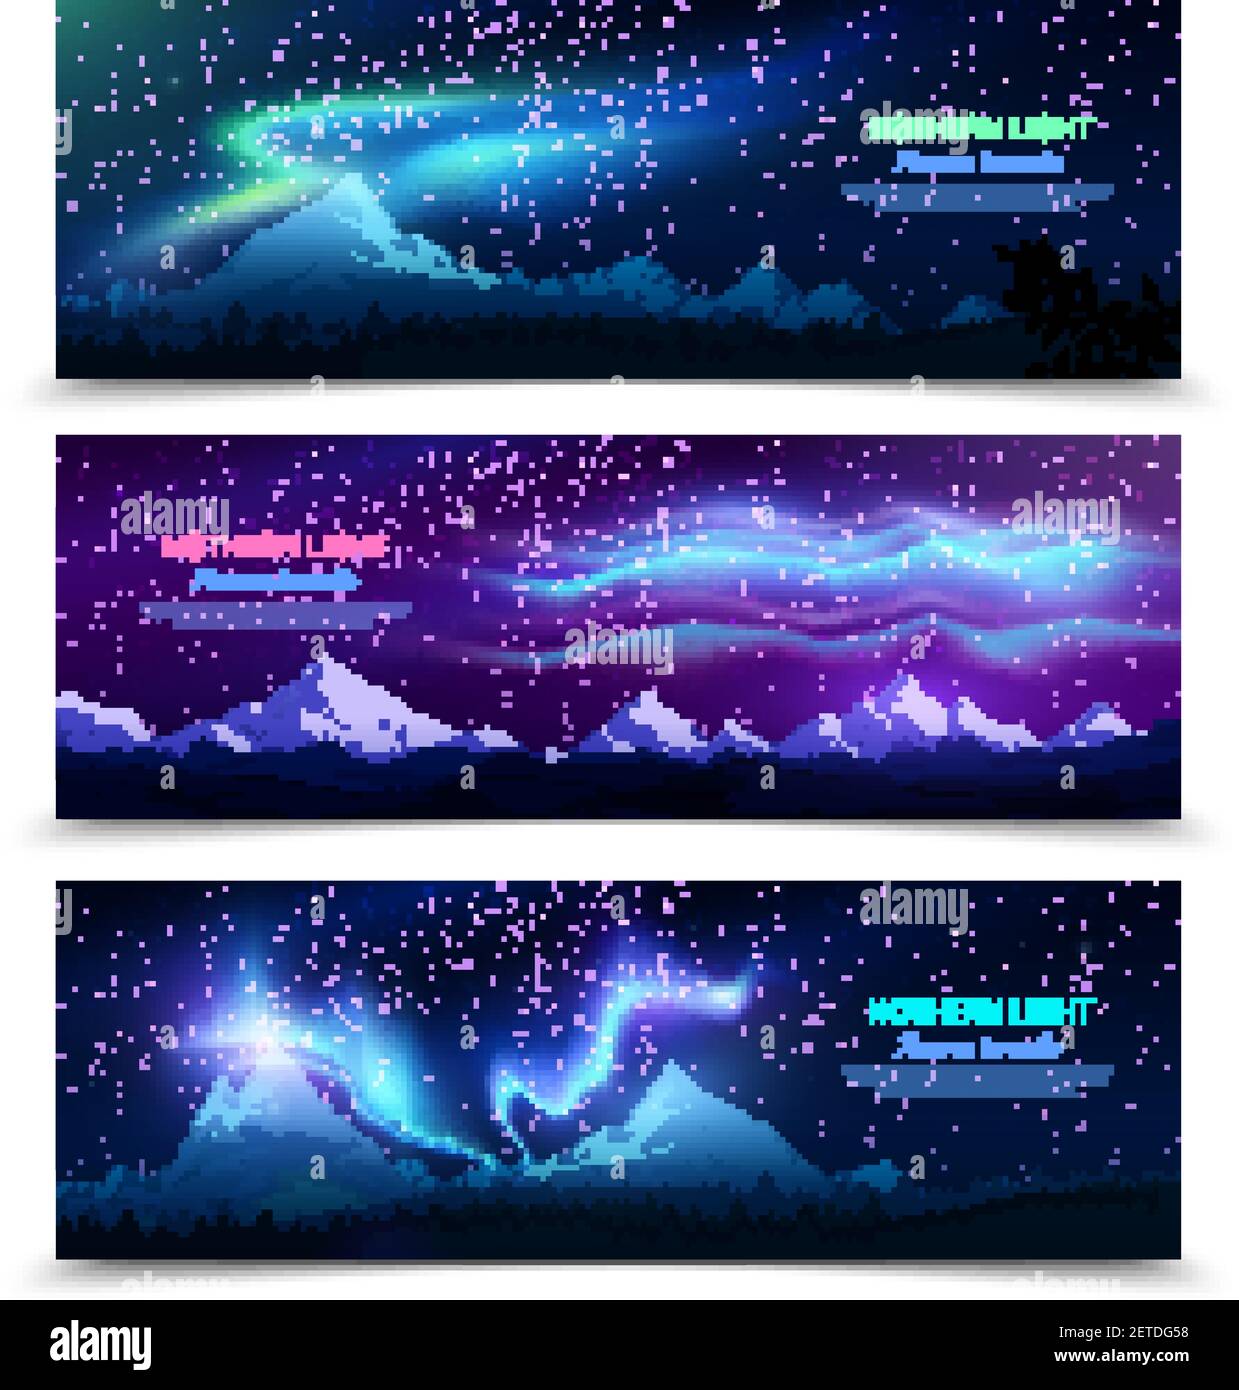 Northern lights aurora borealis night sky and landscape 3 colorful realistic horizontal banners set isolated vector illustration Stock Vector